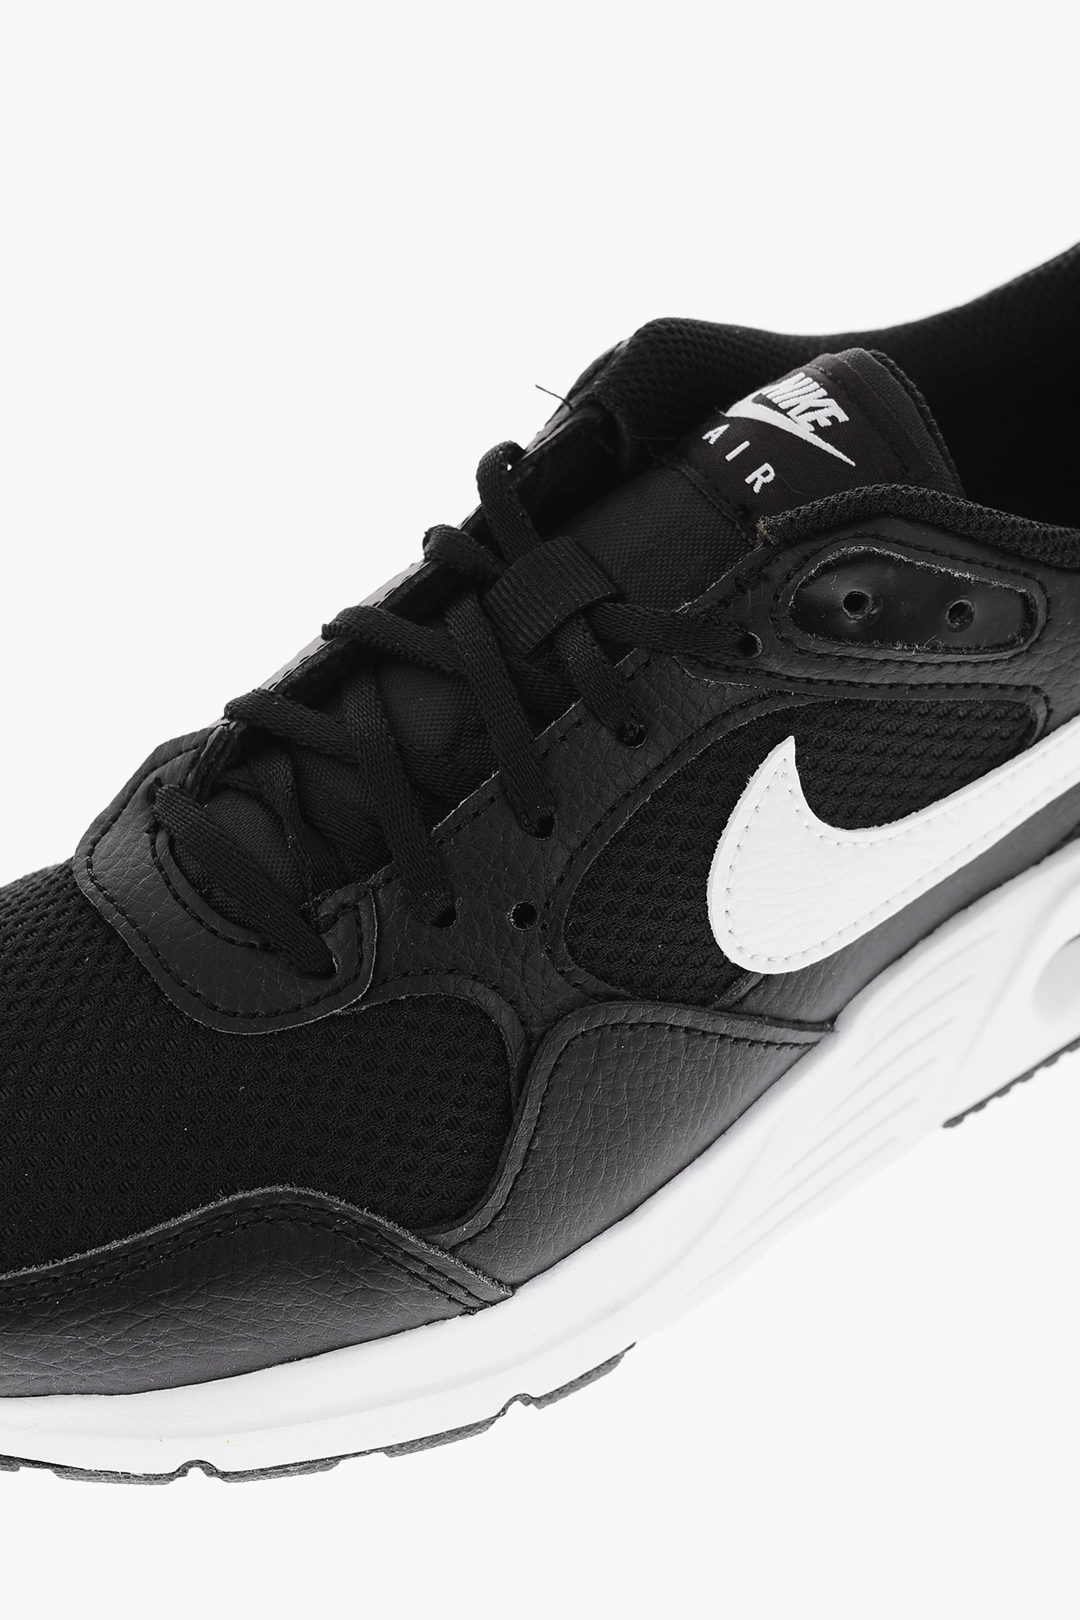 Nike AIR Leather and Fabric AIR MAX SC Sneakers women - Glamood Outlet